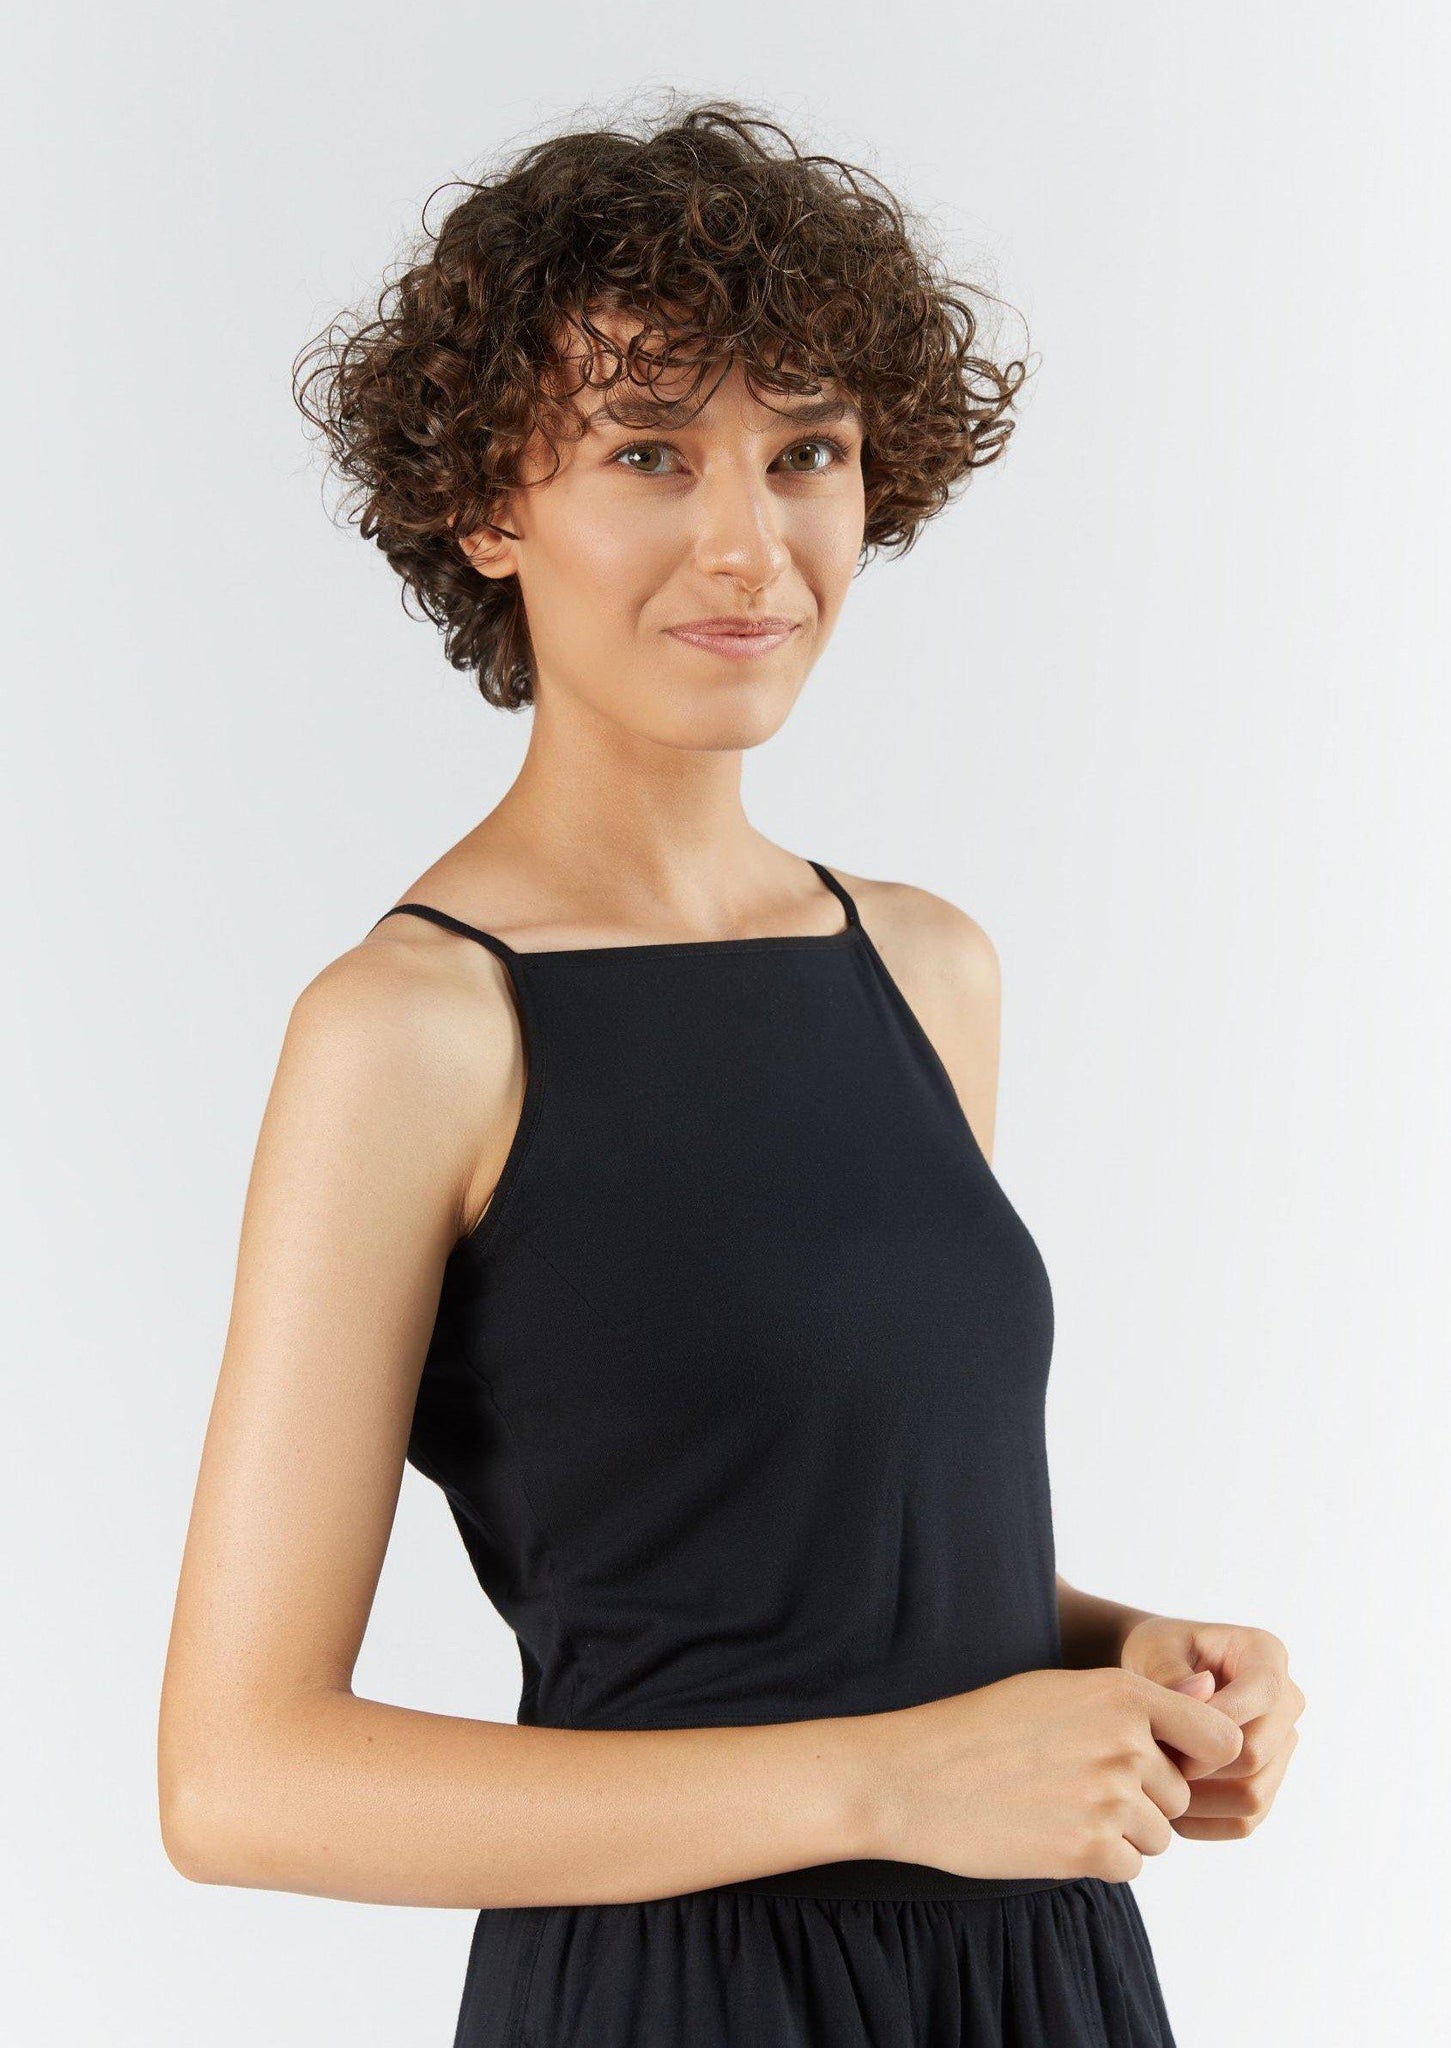 Modal Lite Extra Soft Camisole Top with Built-in Bra